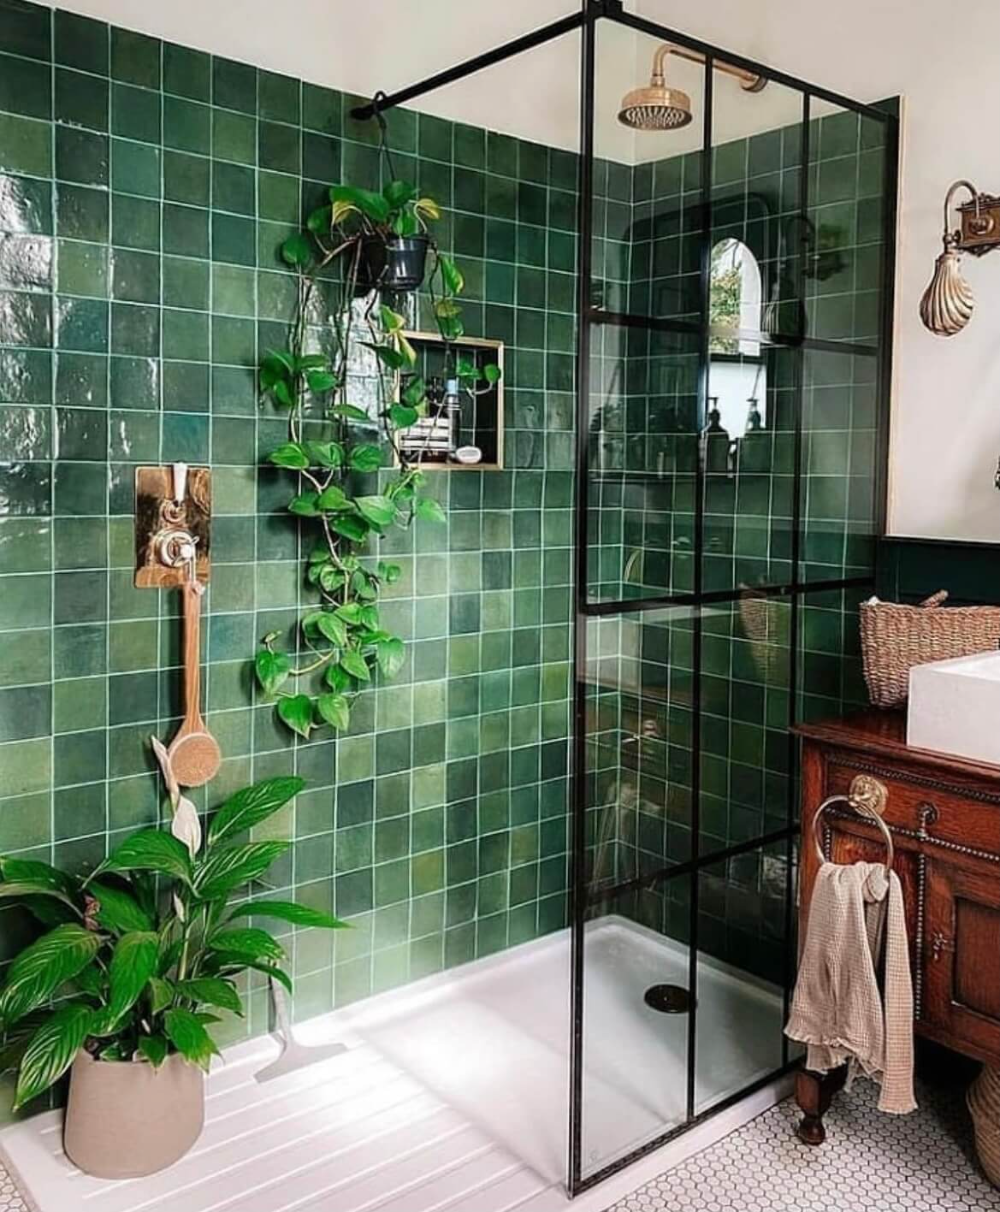 Majestic bathroom styles that gives a
beautiful look